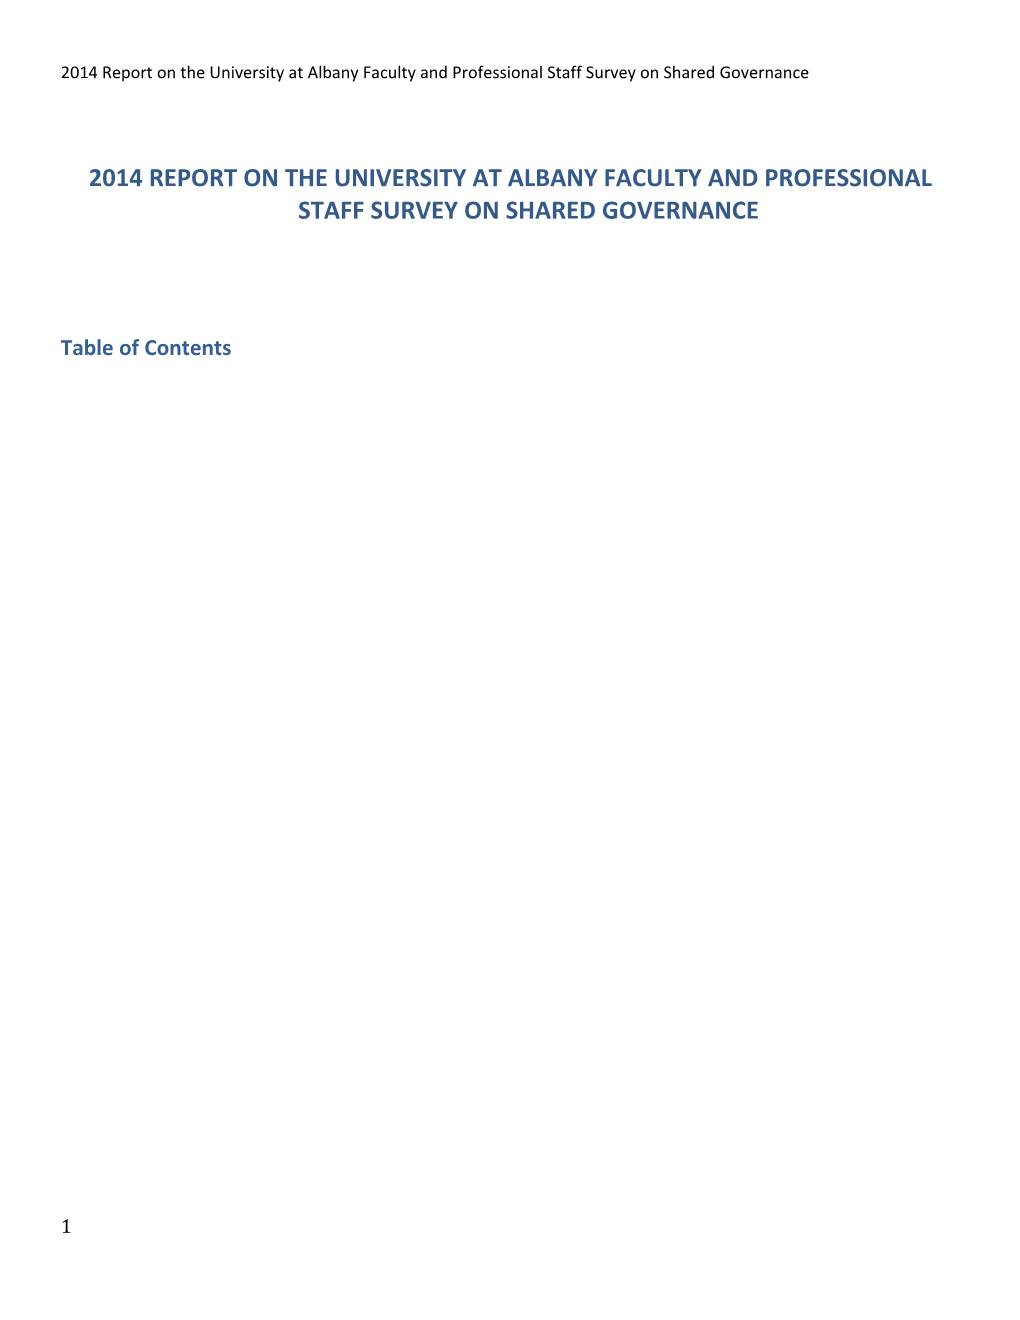 2014 Report on the University at Albany Faculty and Professional Staff Survey on Shared